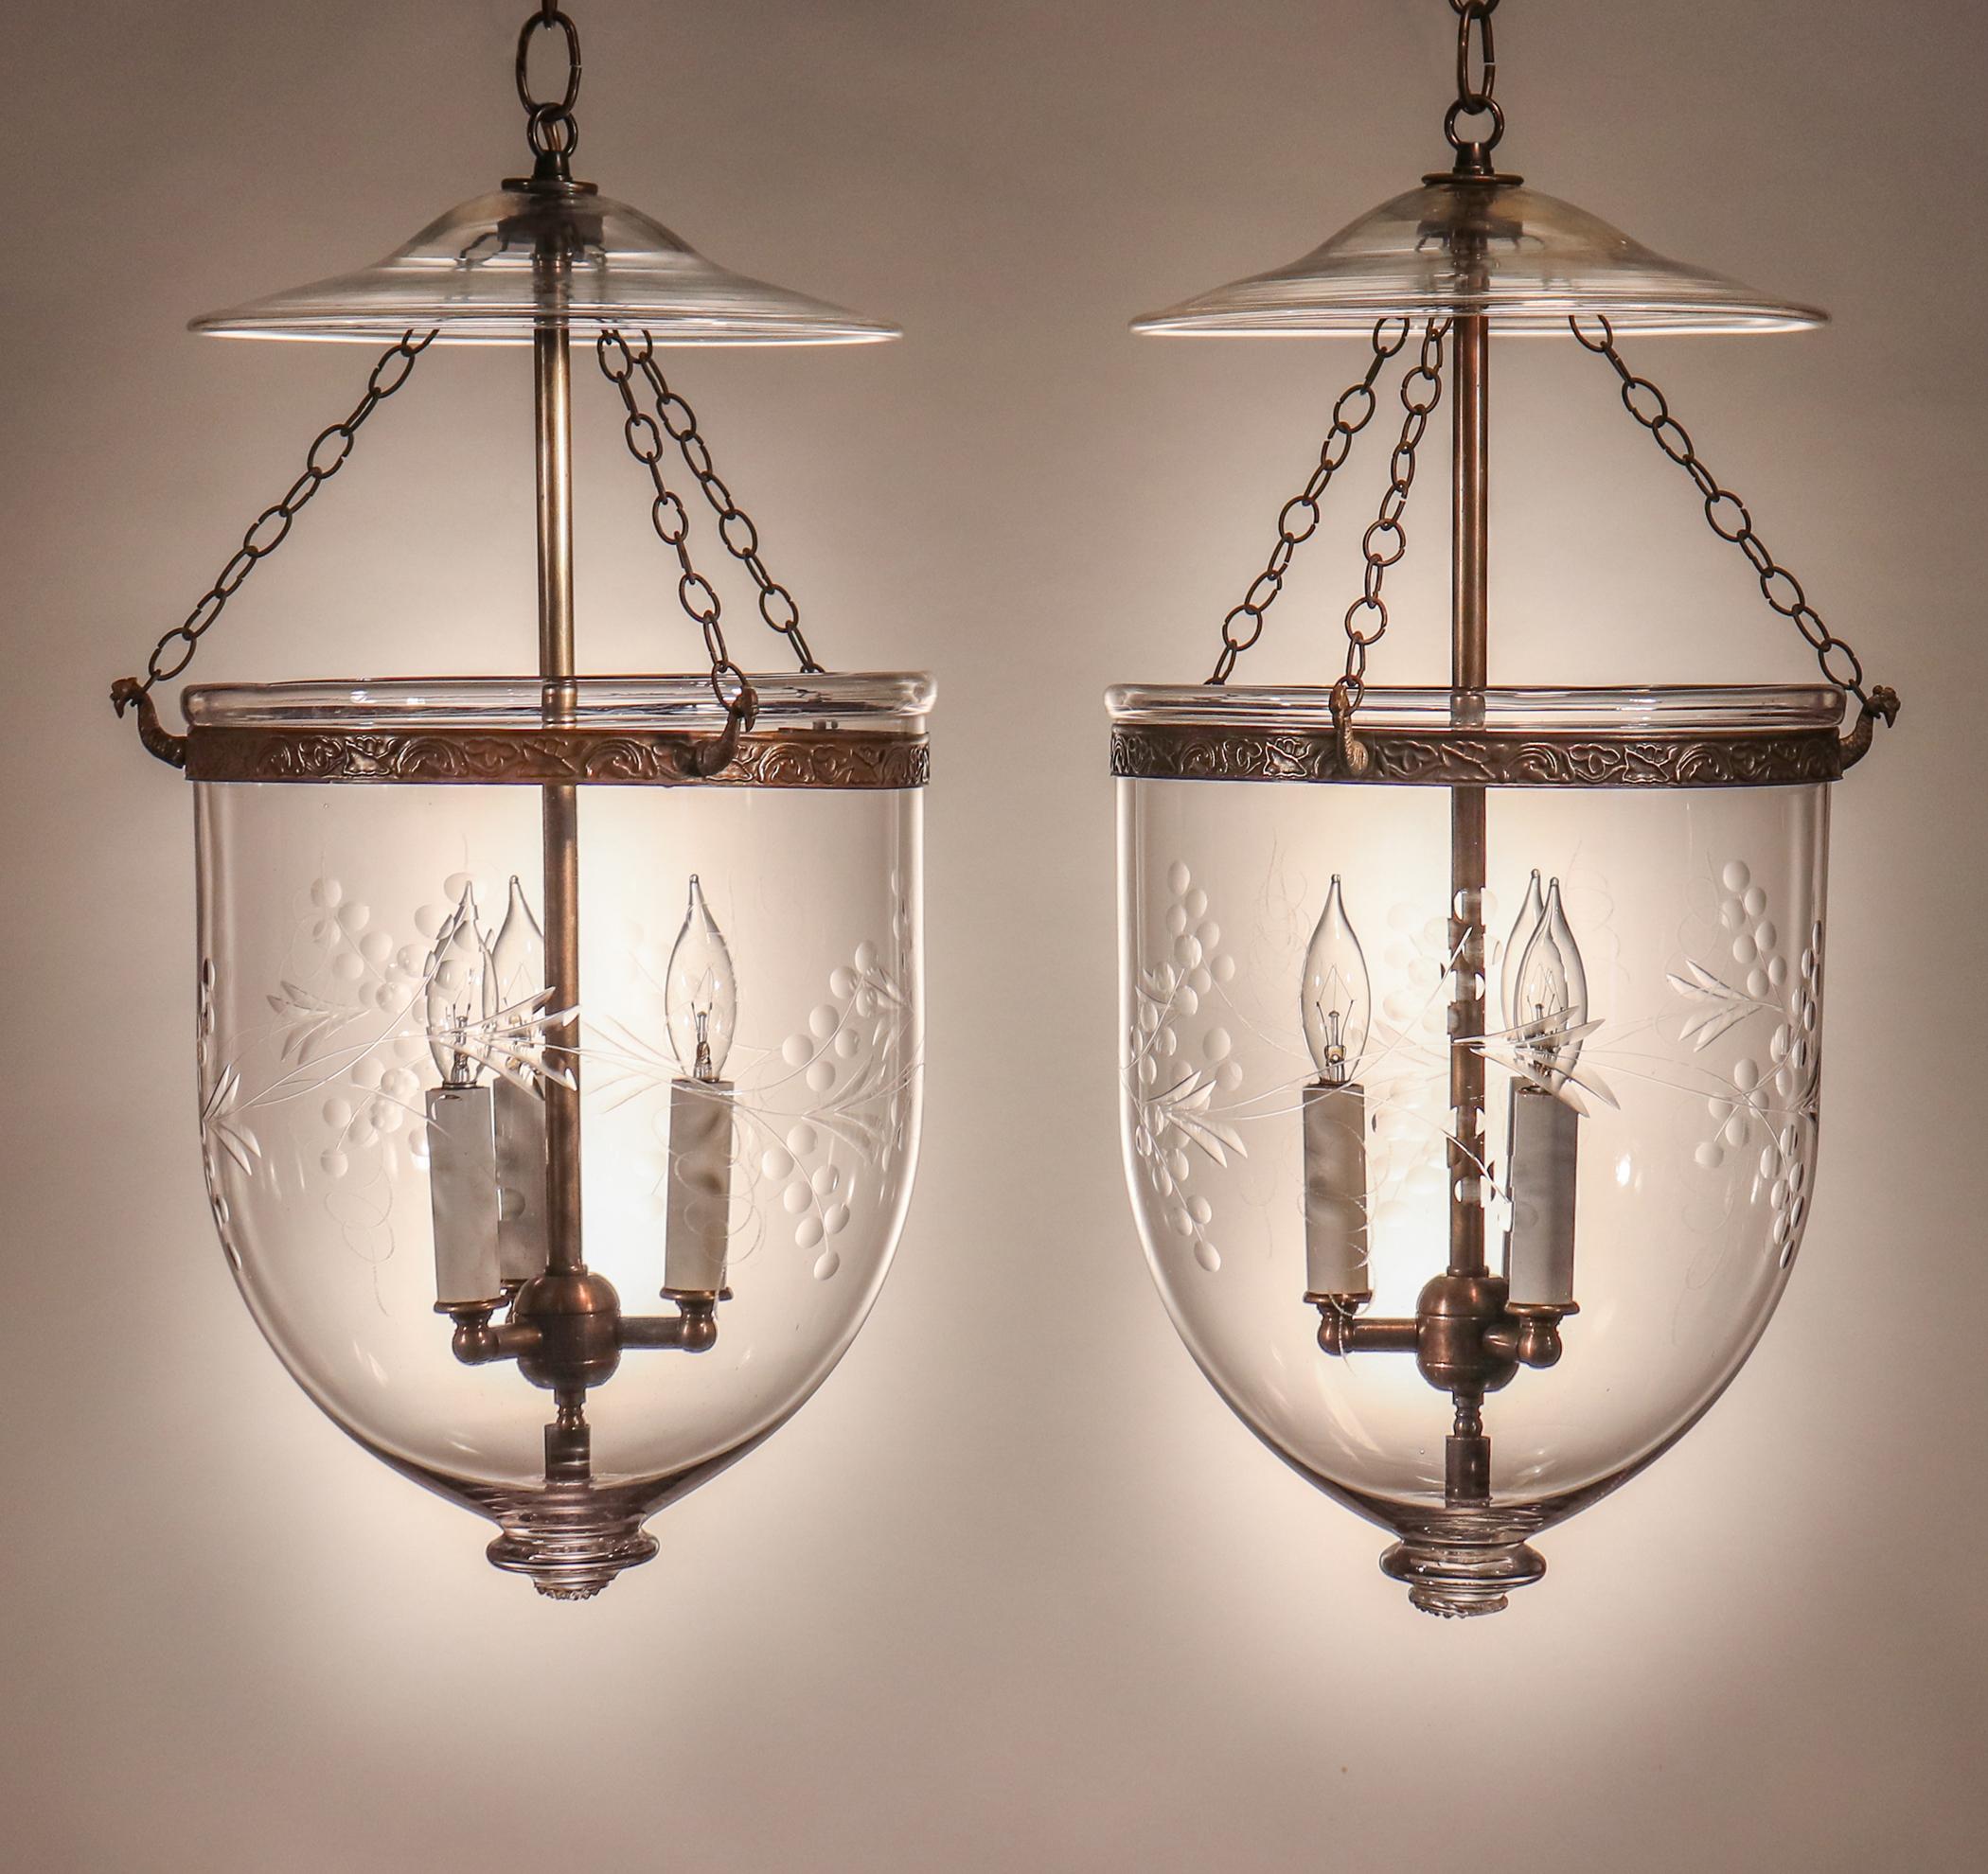 An exquisite pair of bell jar lanterns with excellent quality hand blown glass and an etched and polished vine motif. These circa 1880 English pendants feature their original glass smoke bells and chains. The brass bands, which have a meandering